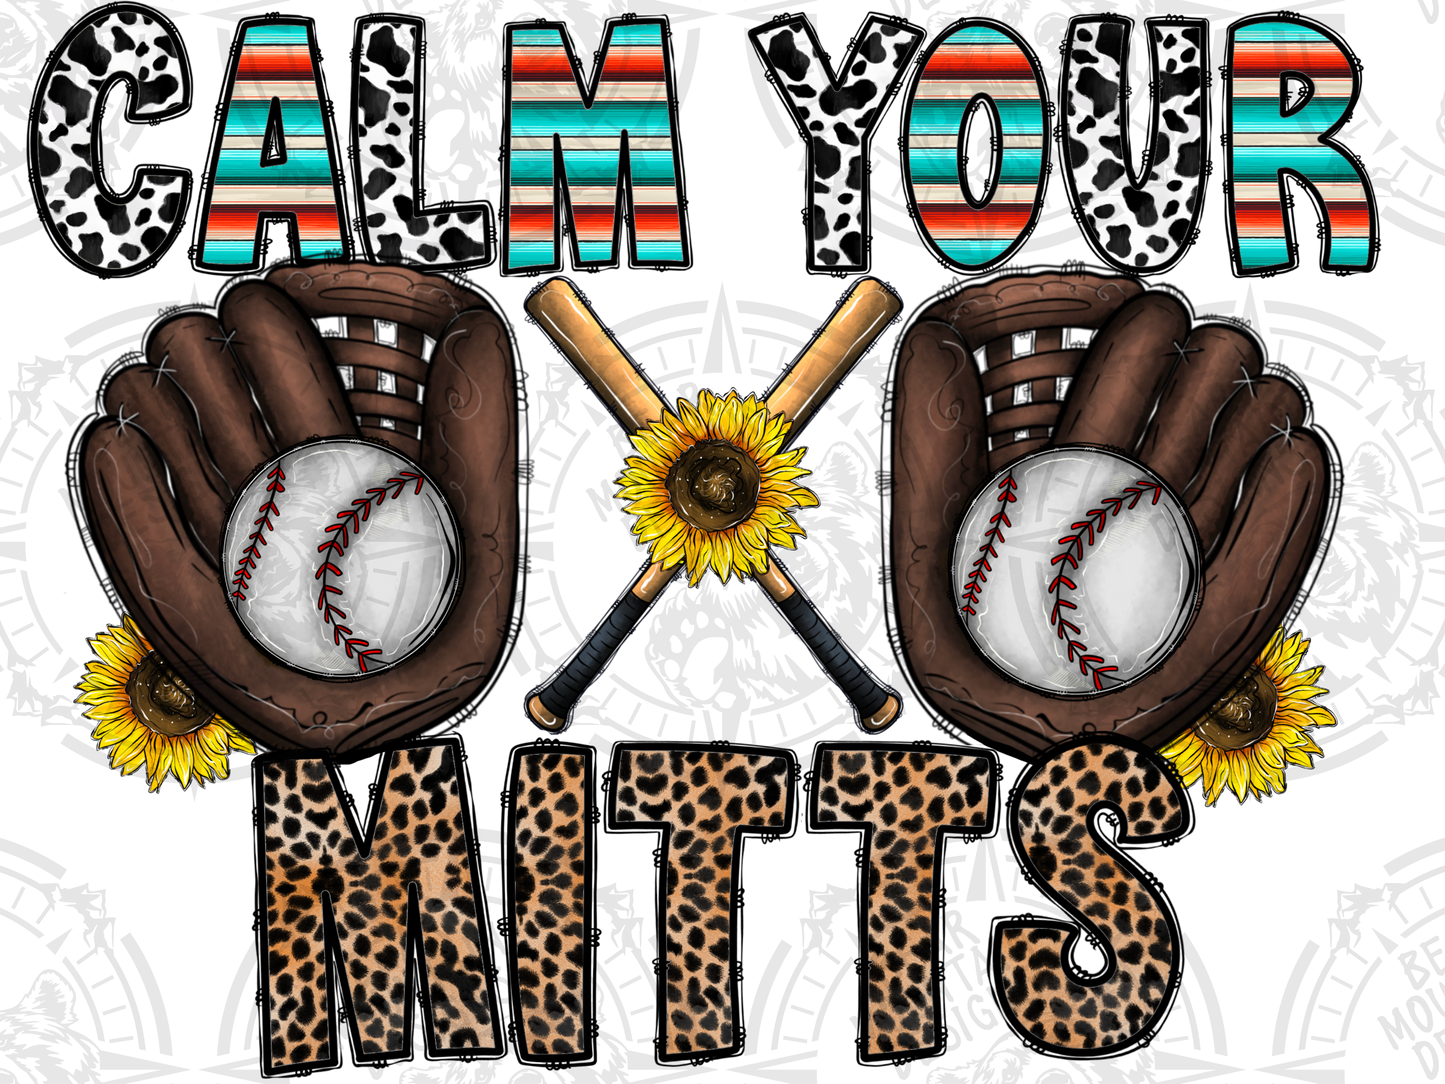 Calm Your Mitts 2 - Baseball